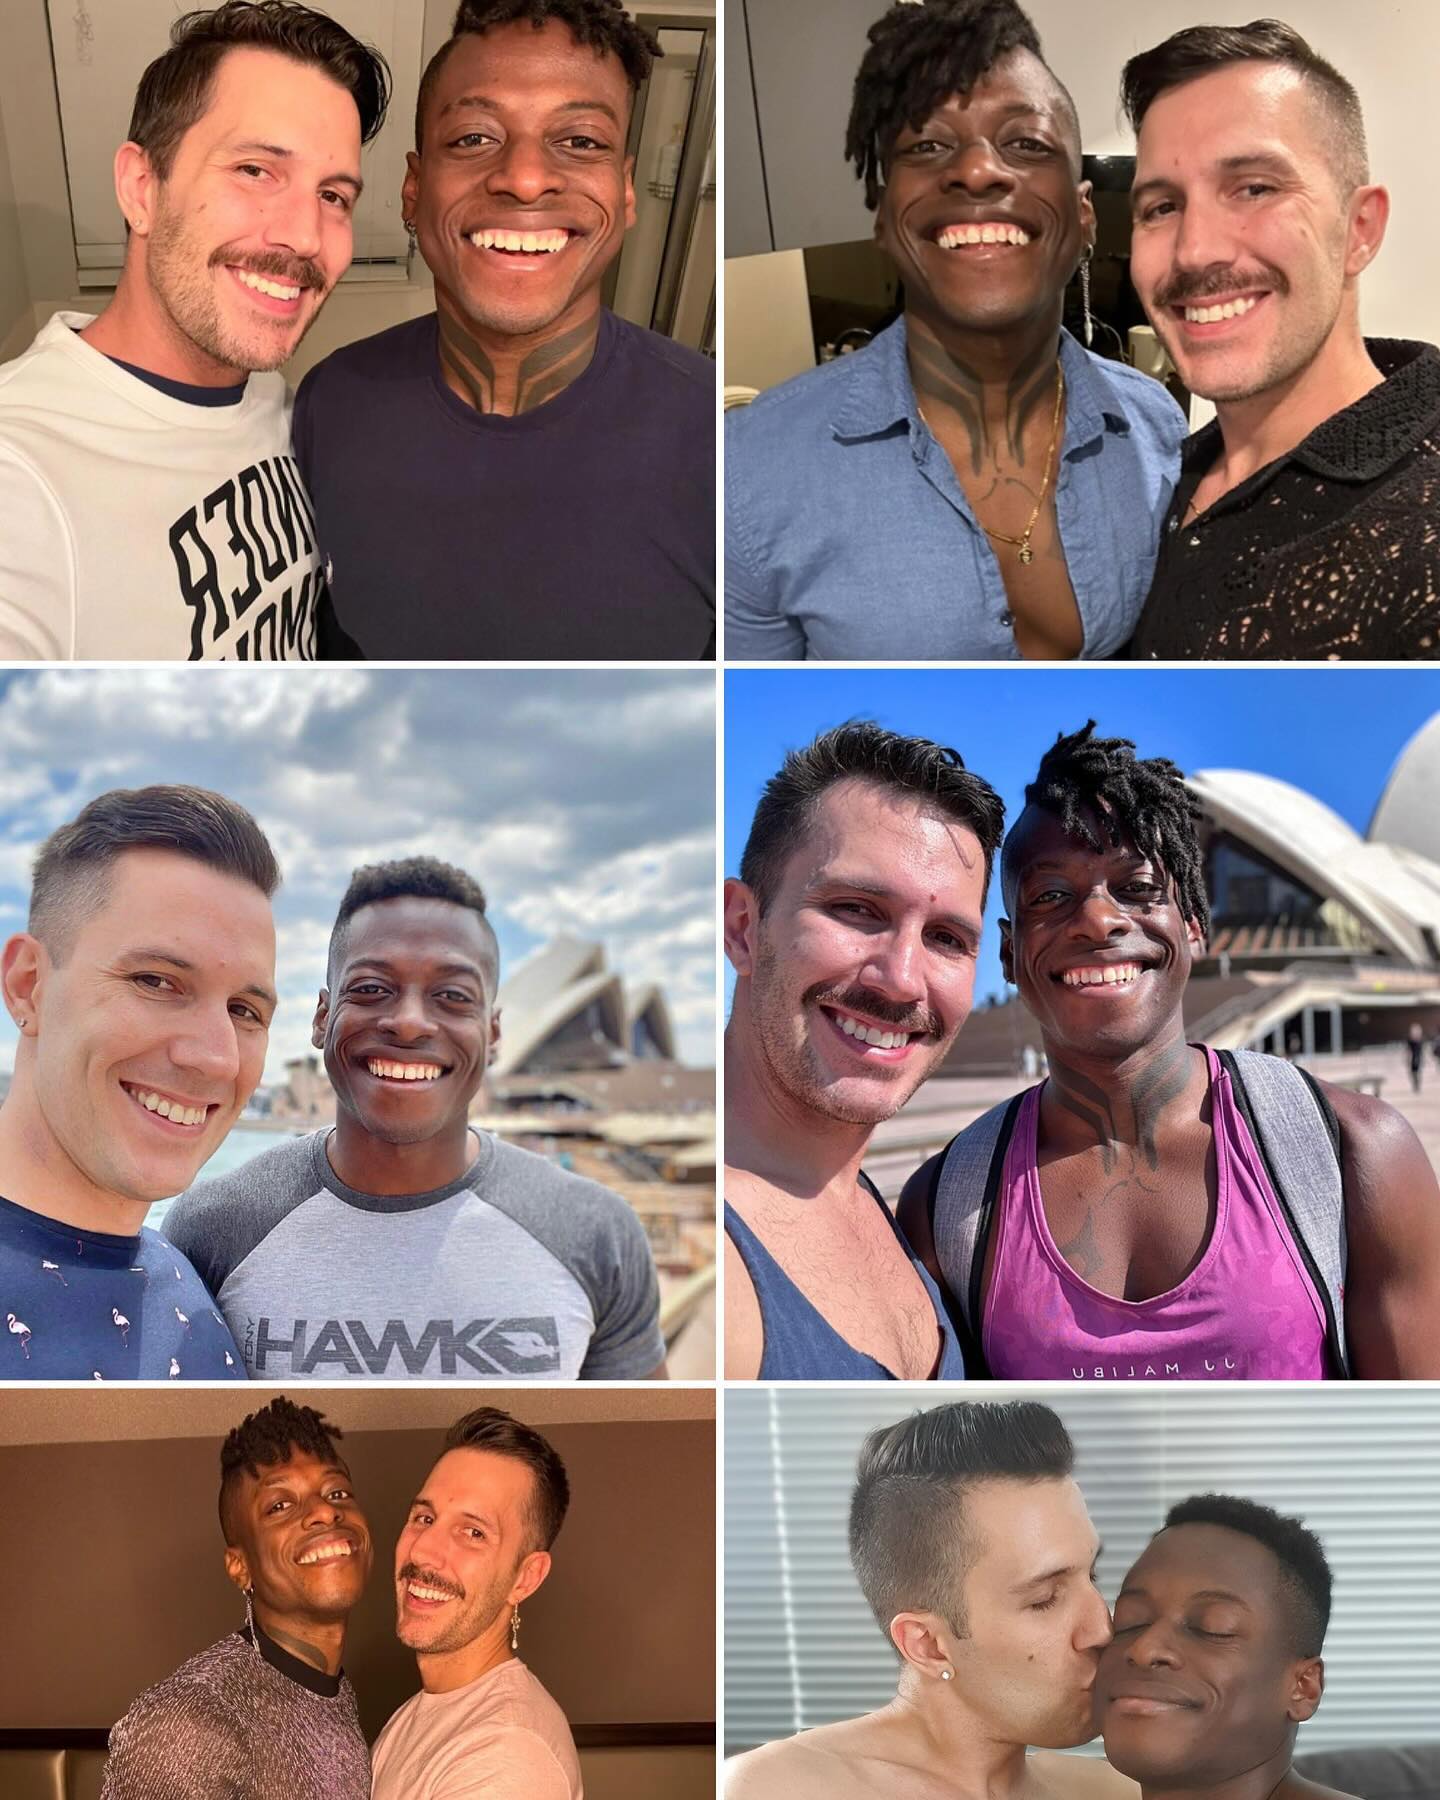 Married my boyfriend, best friend, and confidant two years ago today. You’ve made more than my wildest dreams come true, ever since the day you said “I Do” 🥰
#gaymarriage #anniversary #lgbt